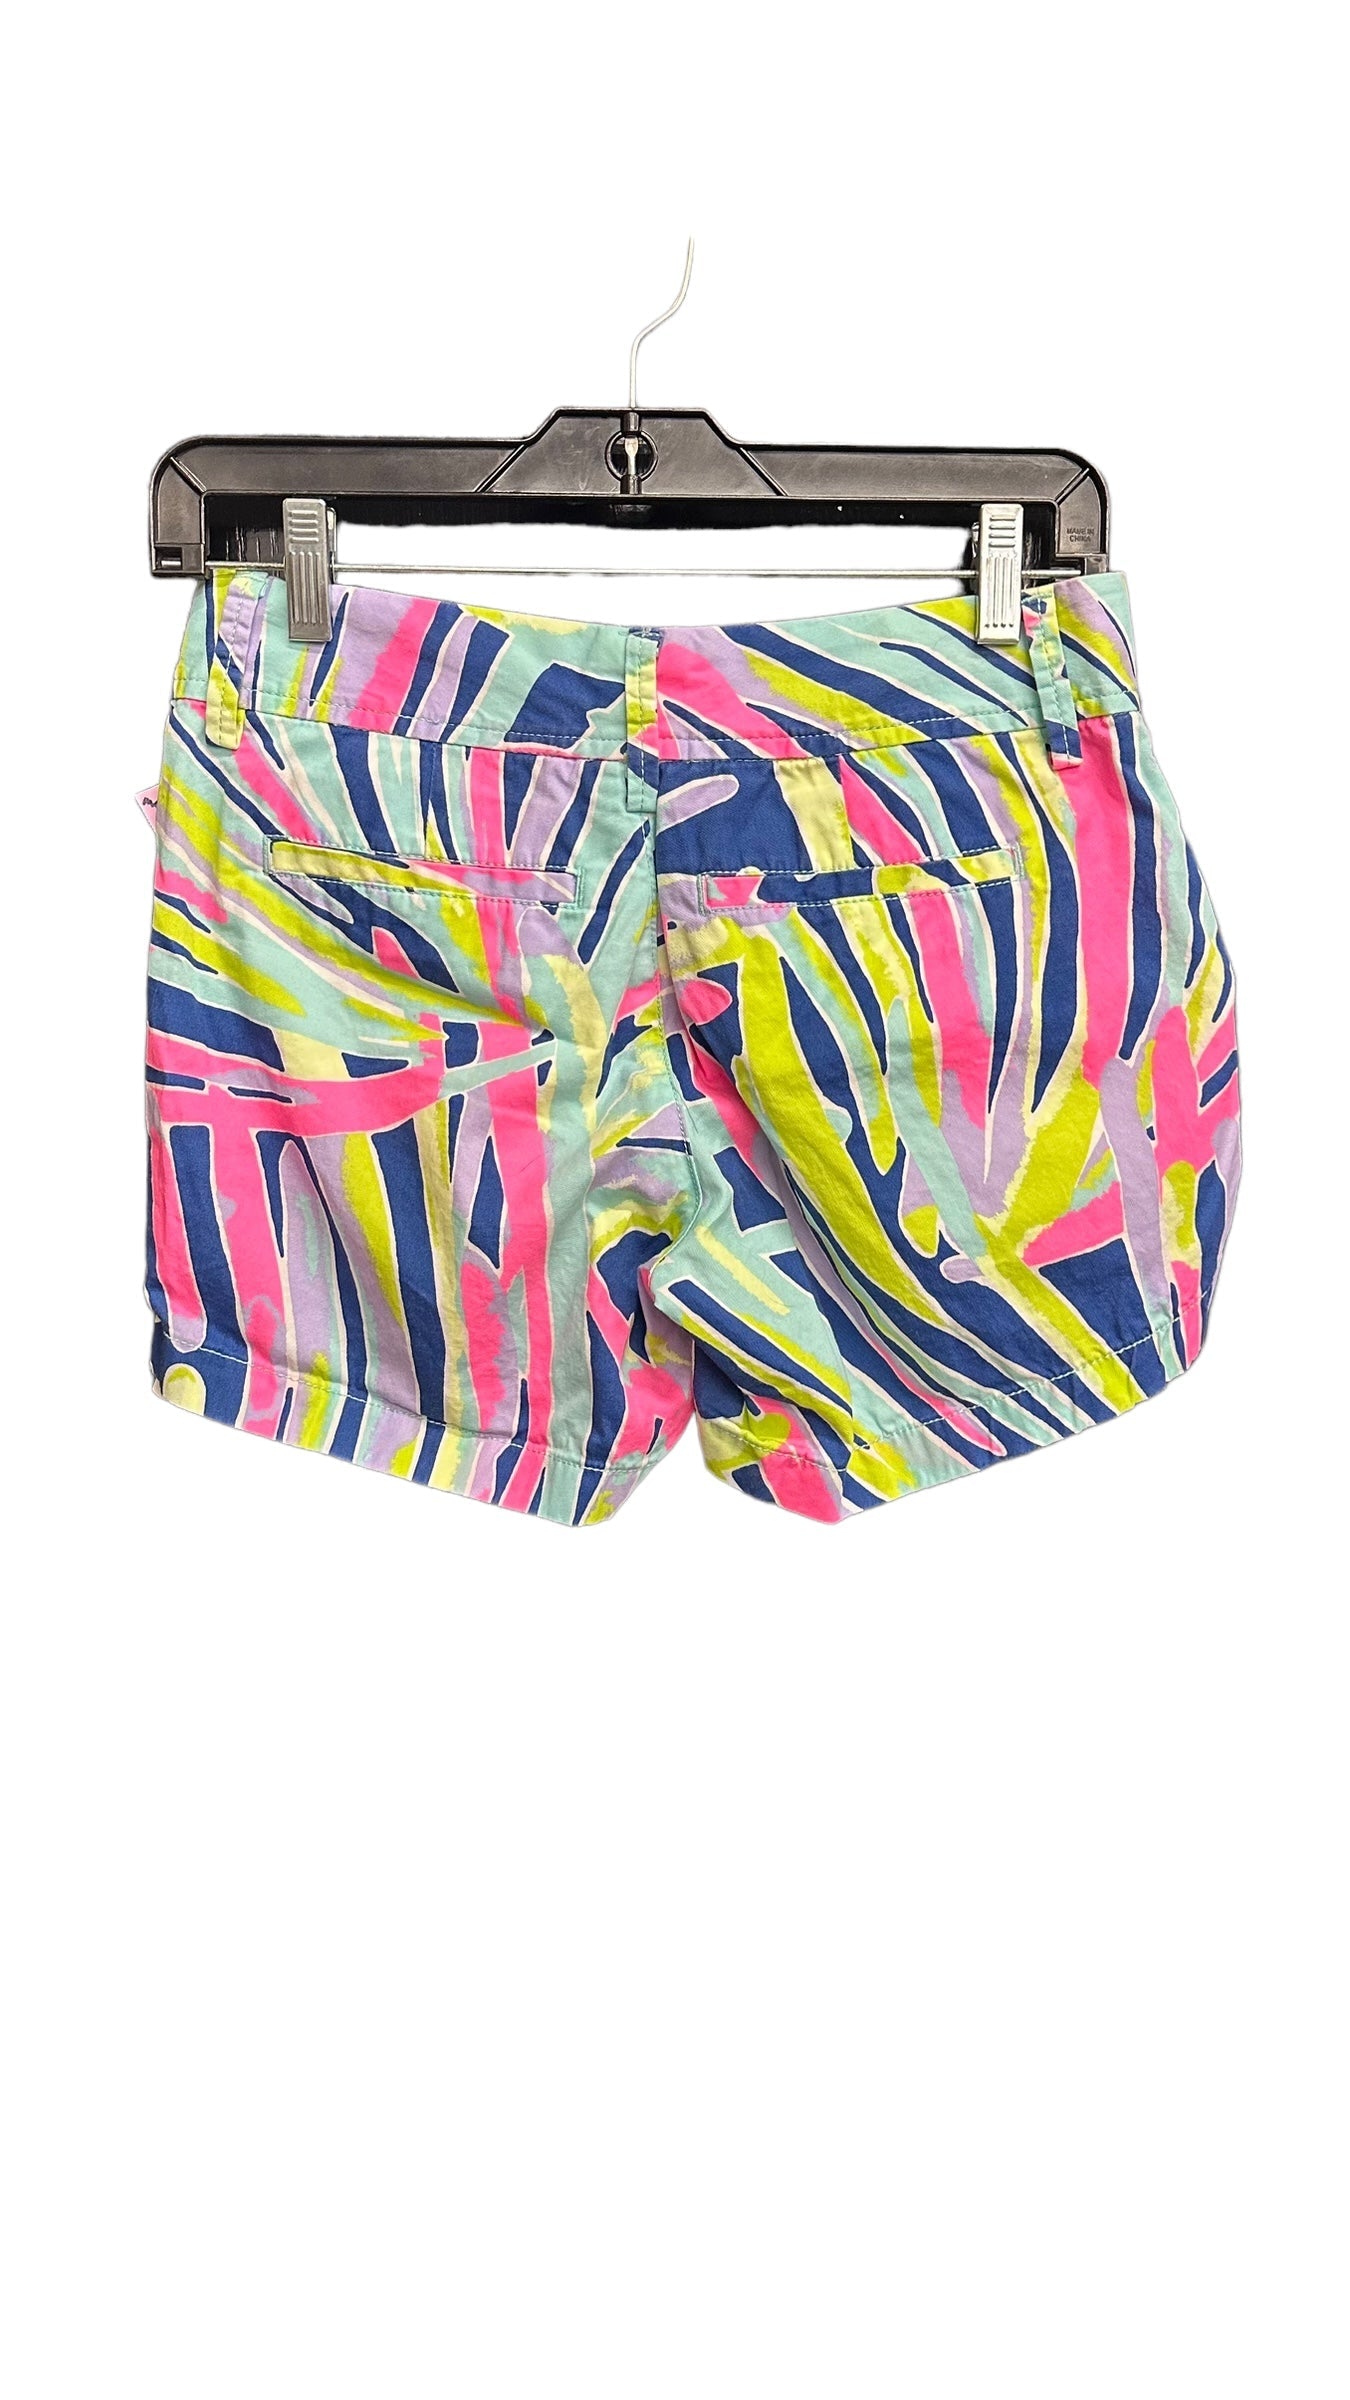 Shorts By Lilly Pulitzer  Size: Xs